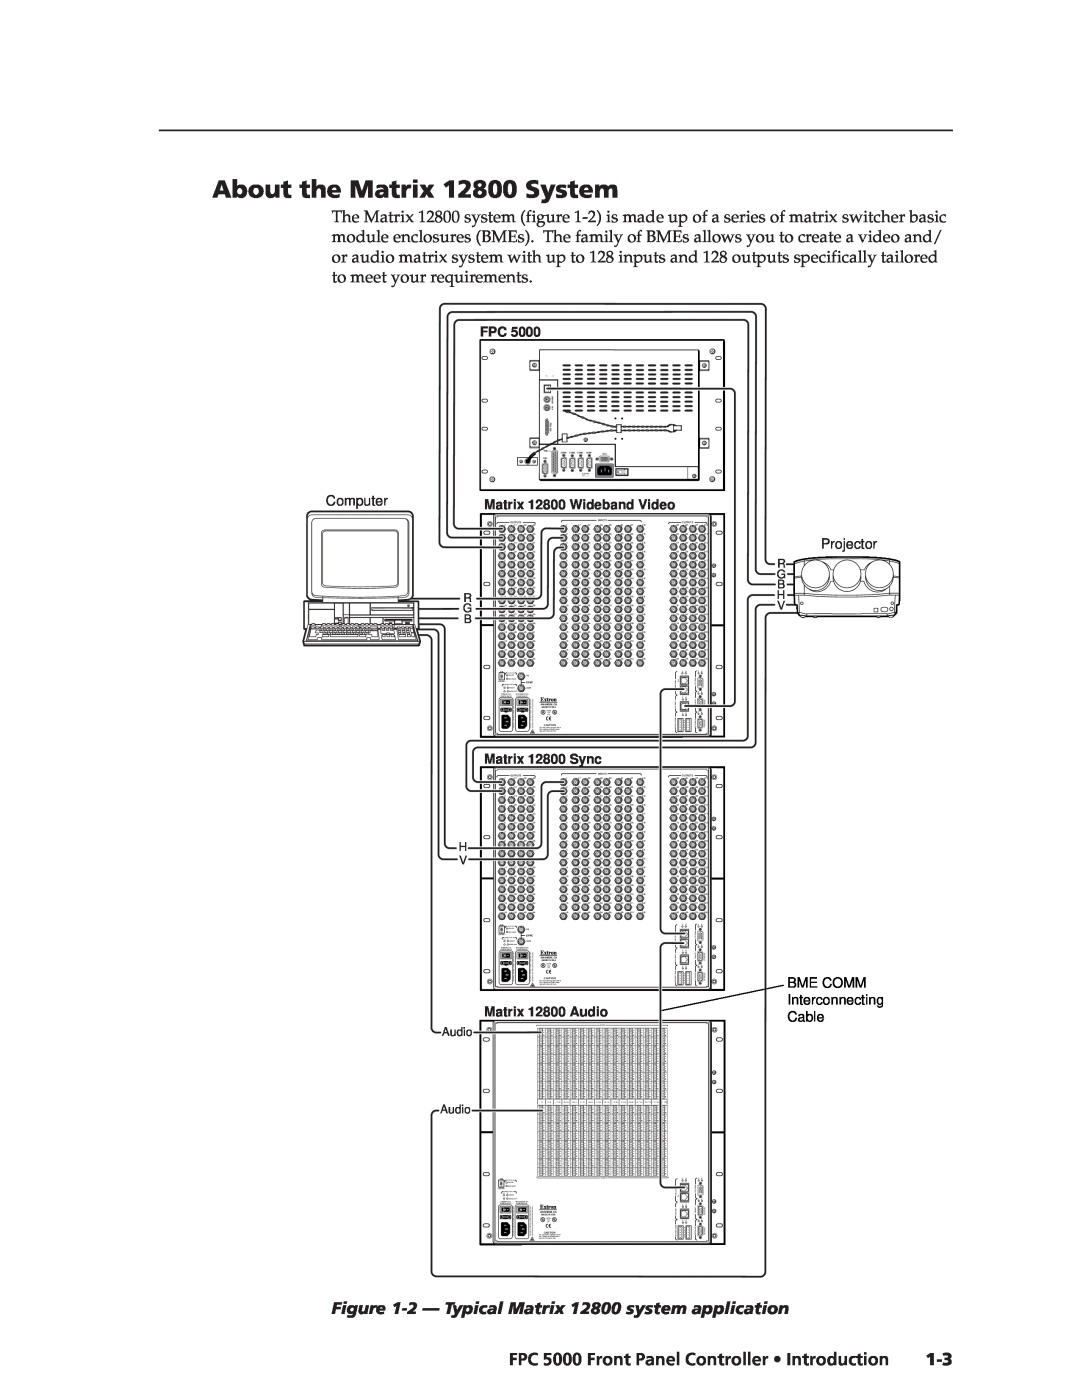 Extron electronic FPC 5000 About the Matrix 12800 System, 2 - Typical Matrix 12800 system application, Matrix 12800 Sync 